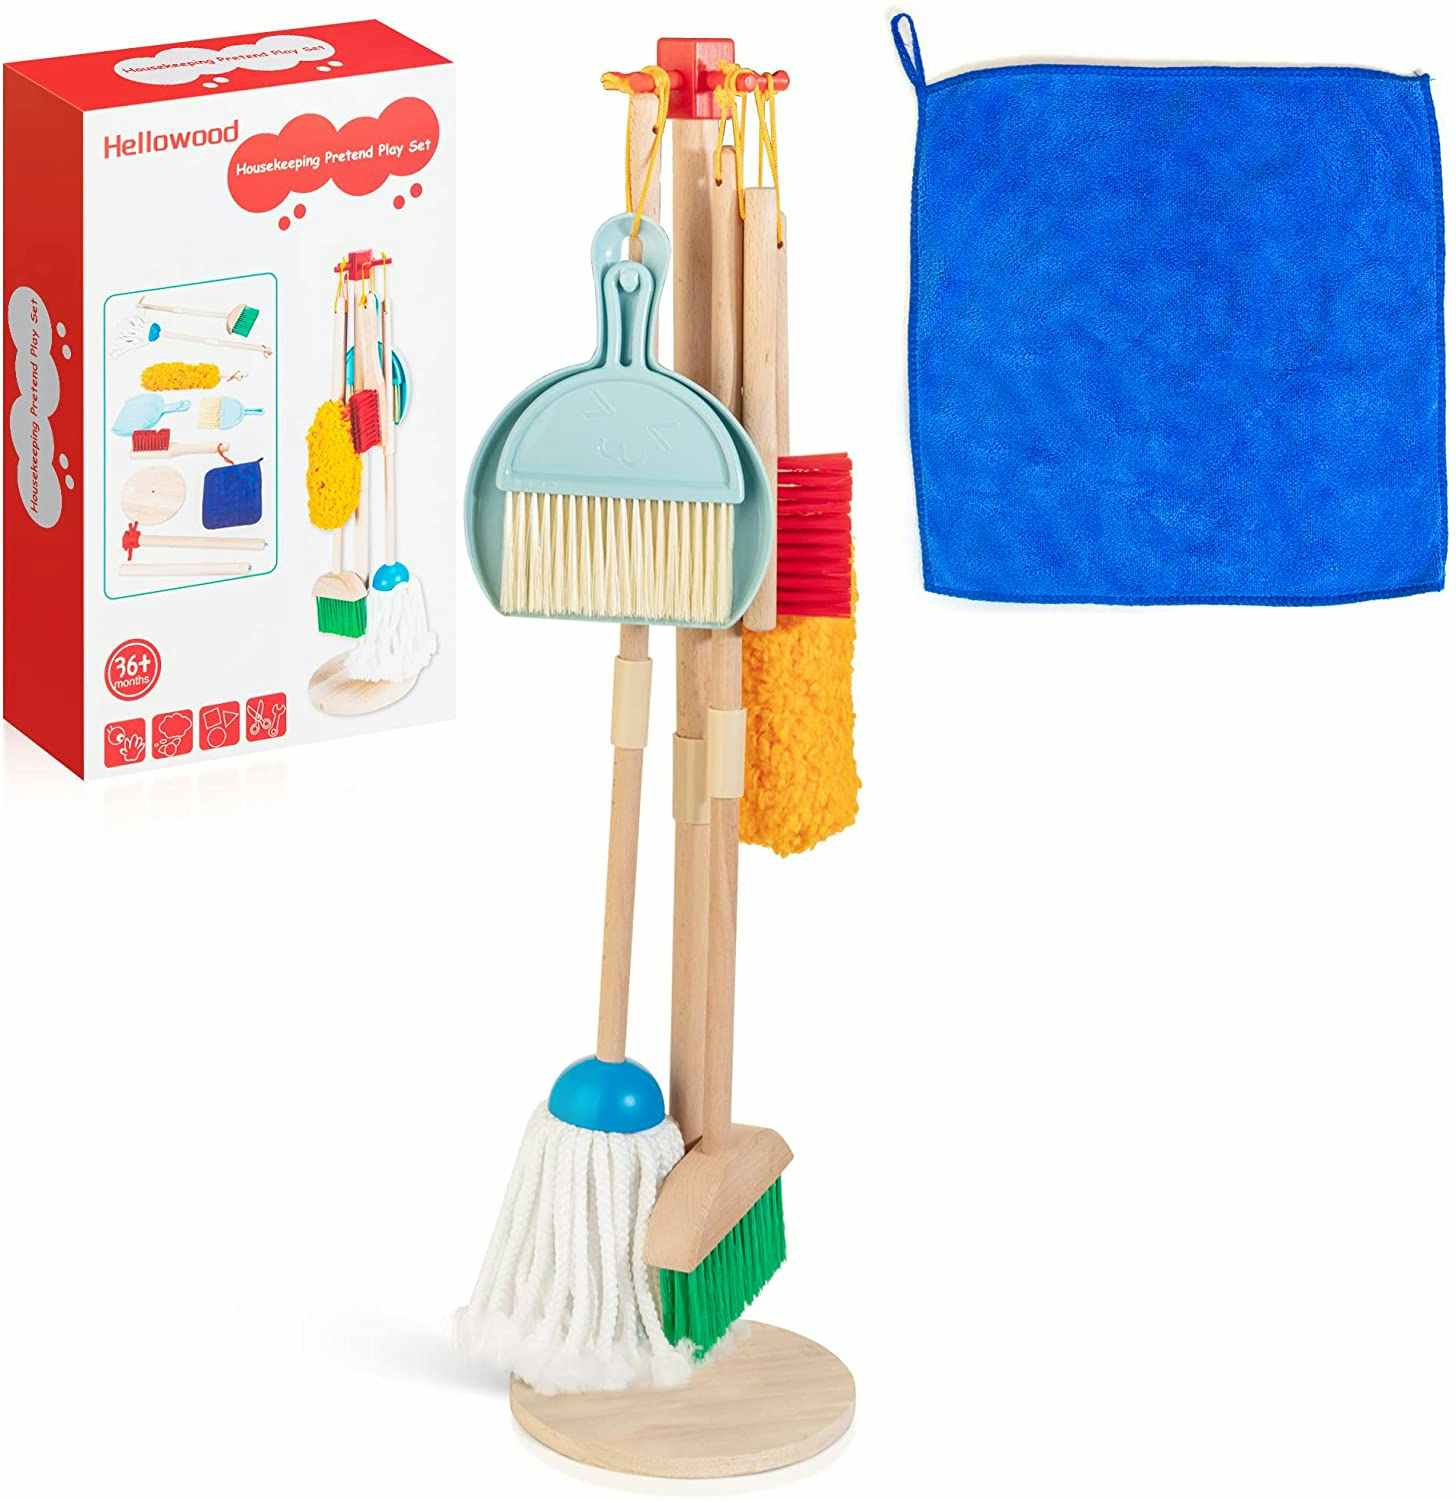 A HelloWood Kids Cleaning Set and its box on a white background.